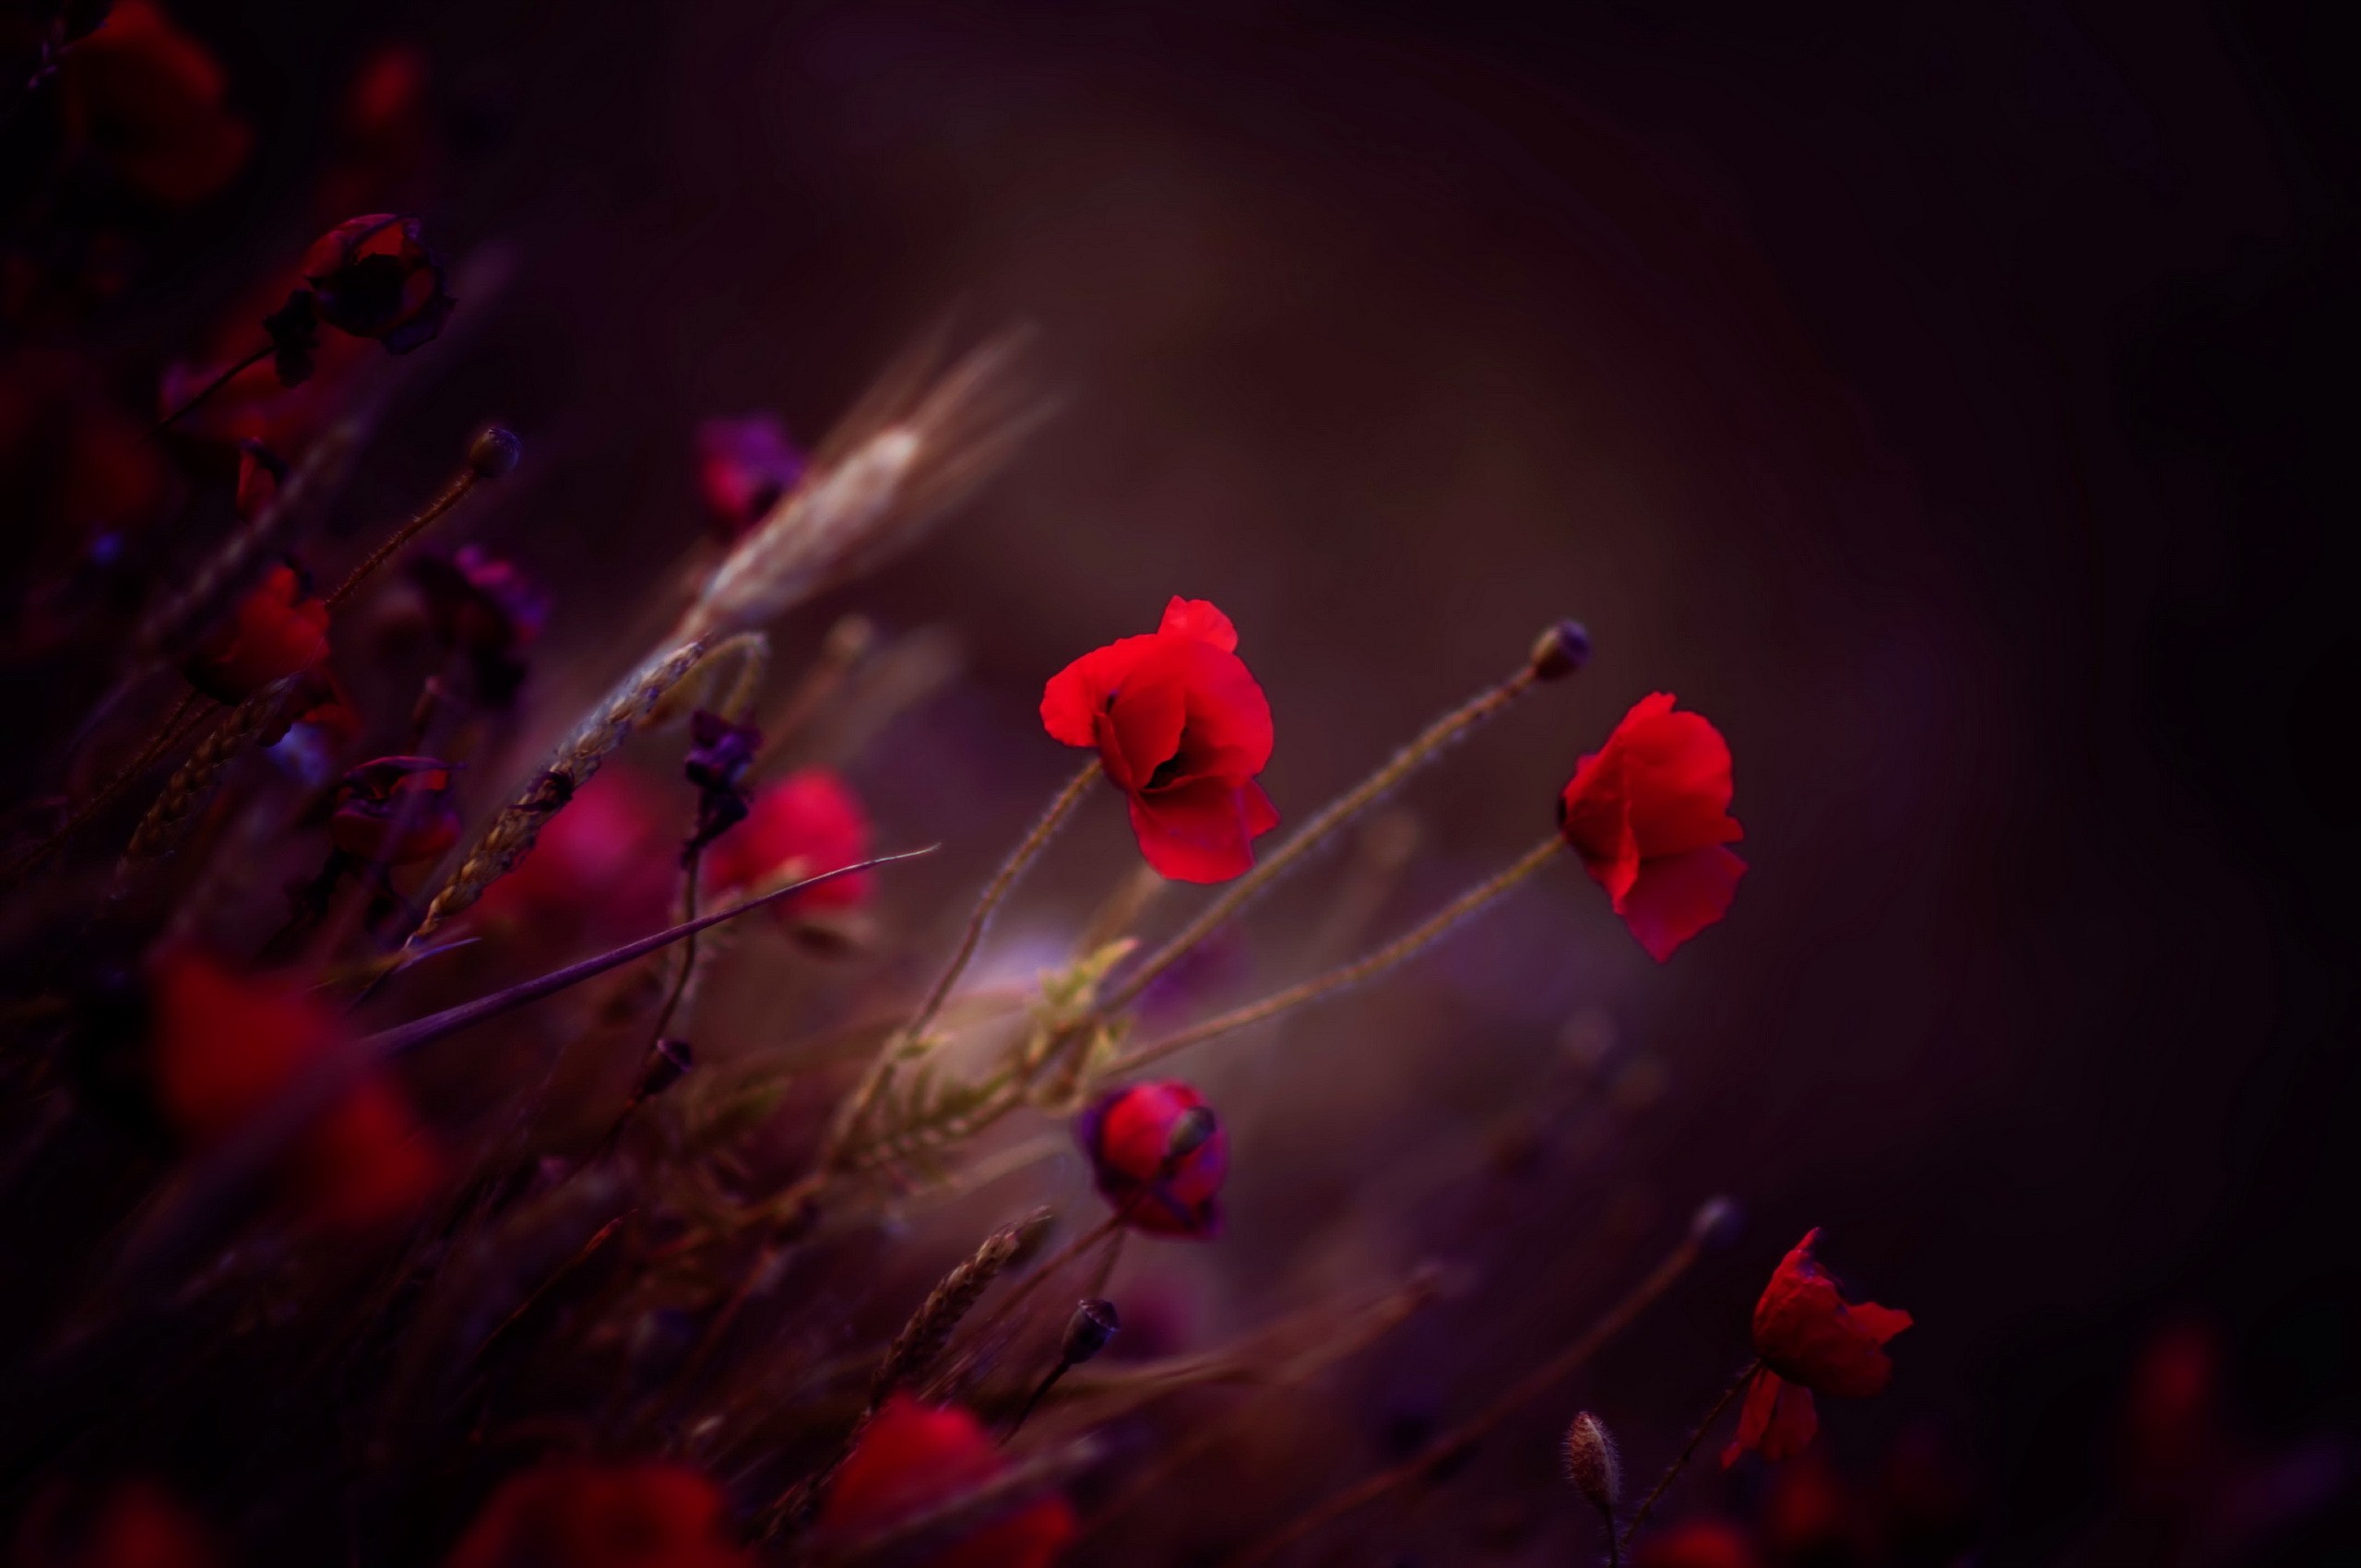 General 2560x1700 flowers plants poppies red flowers closeup low light